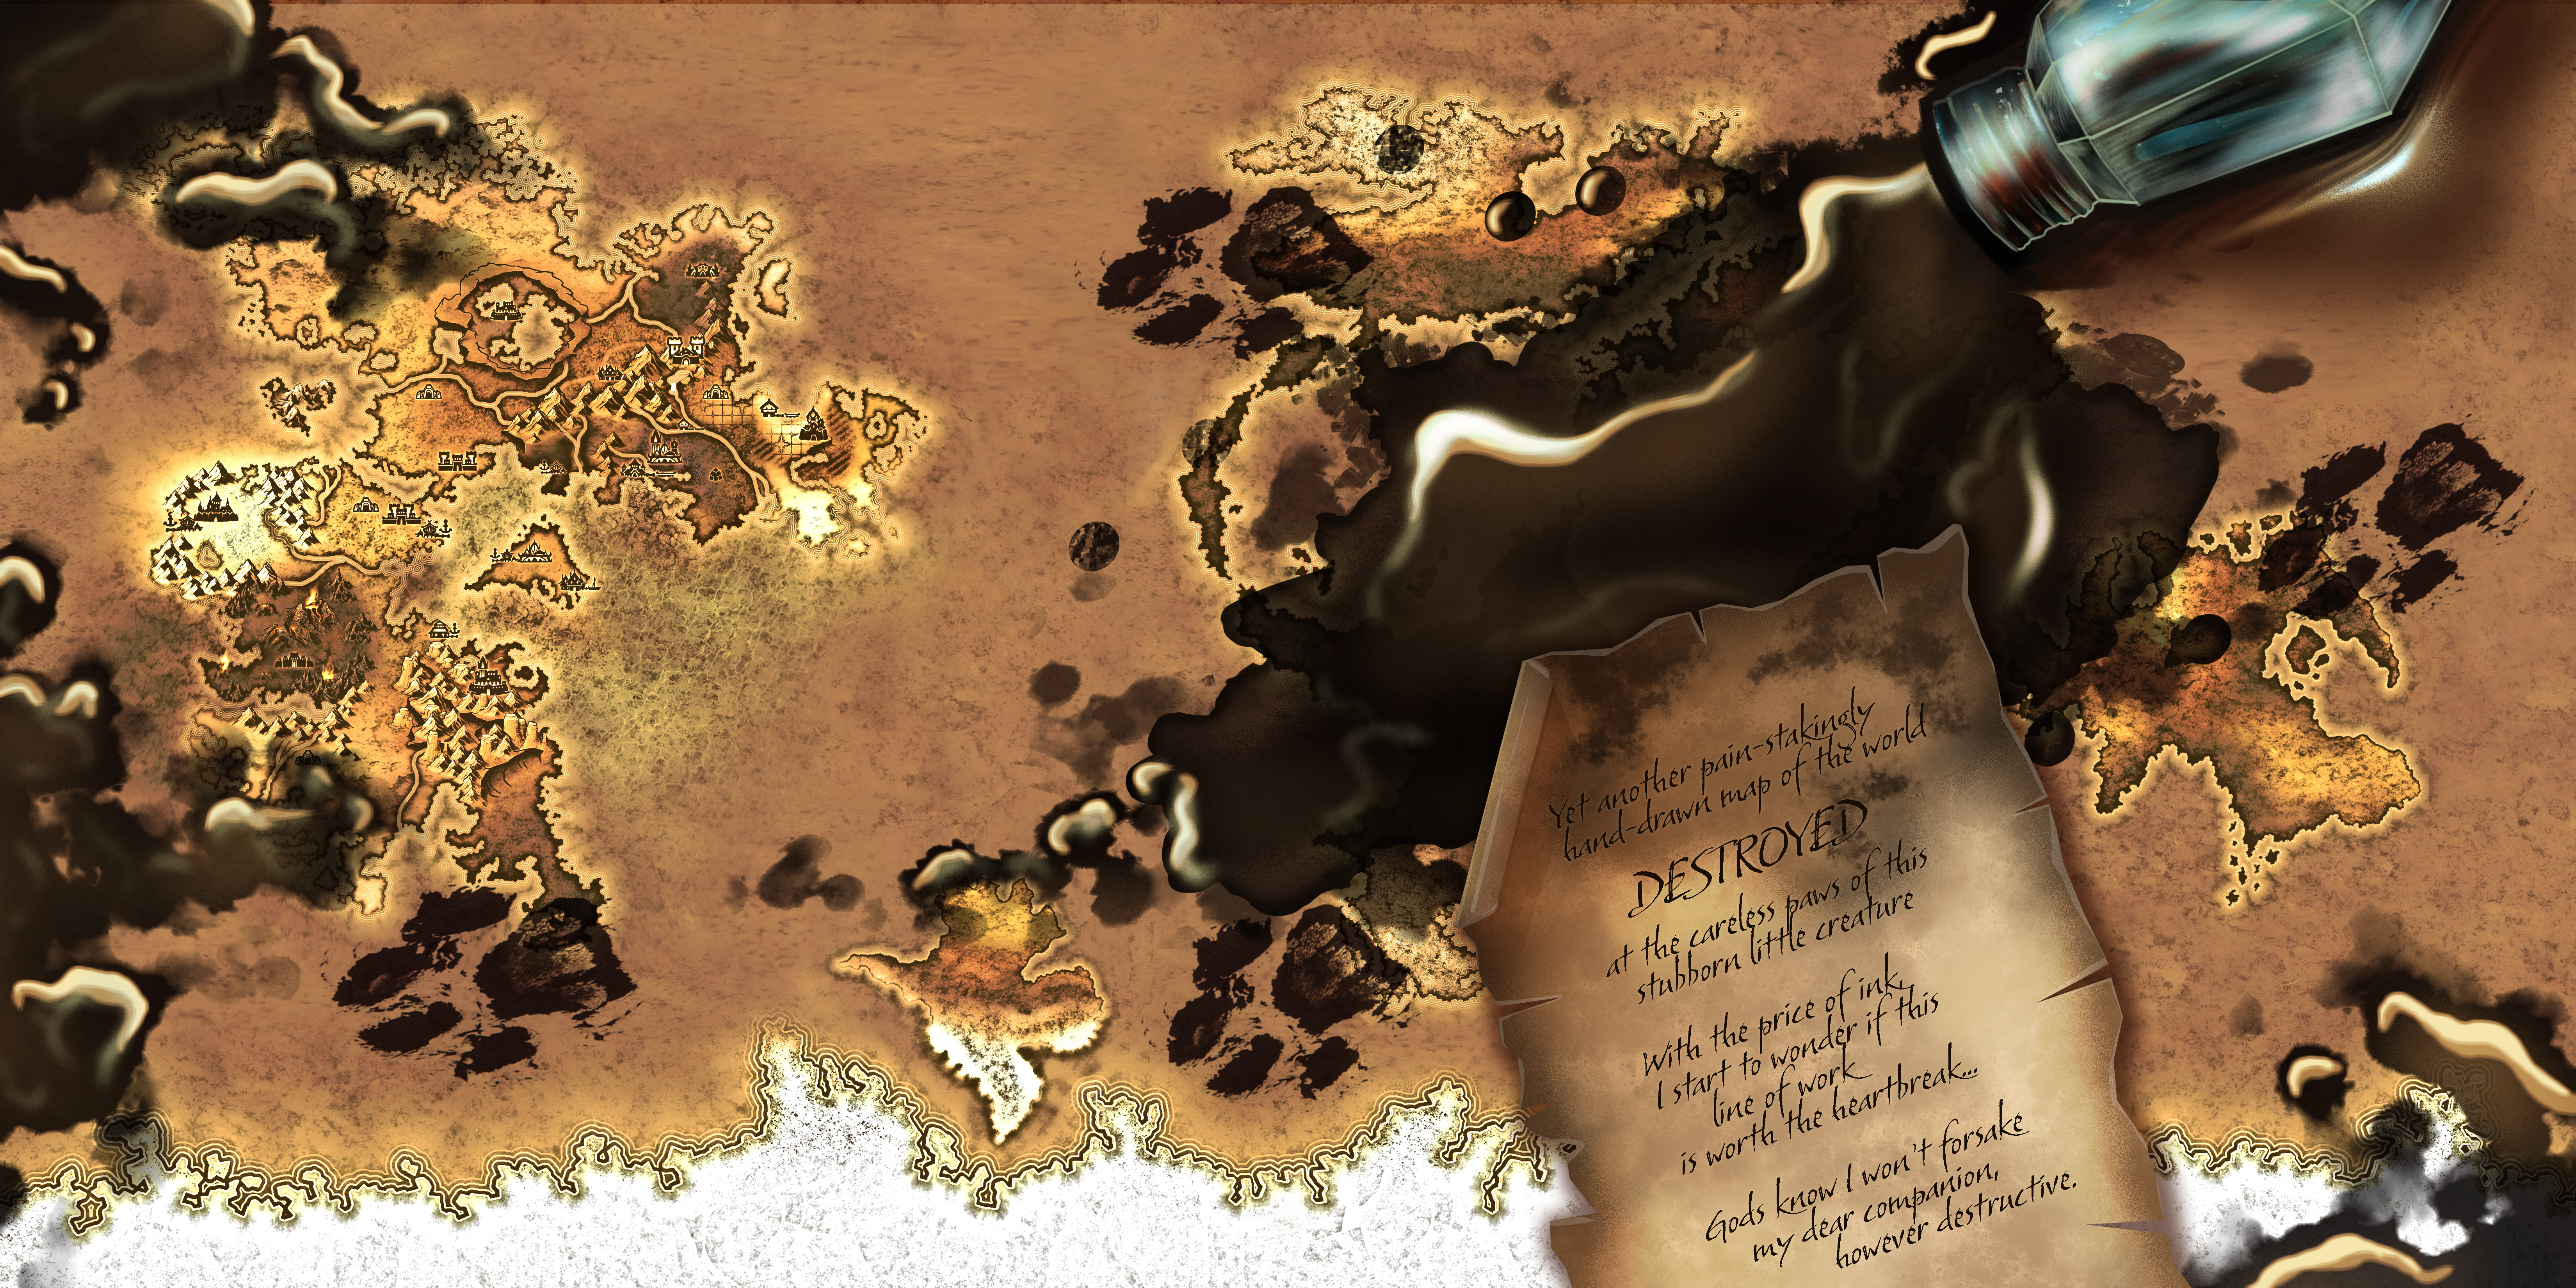 Ink-Stained Map of Malkora